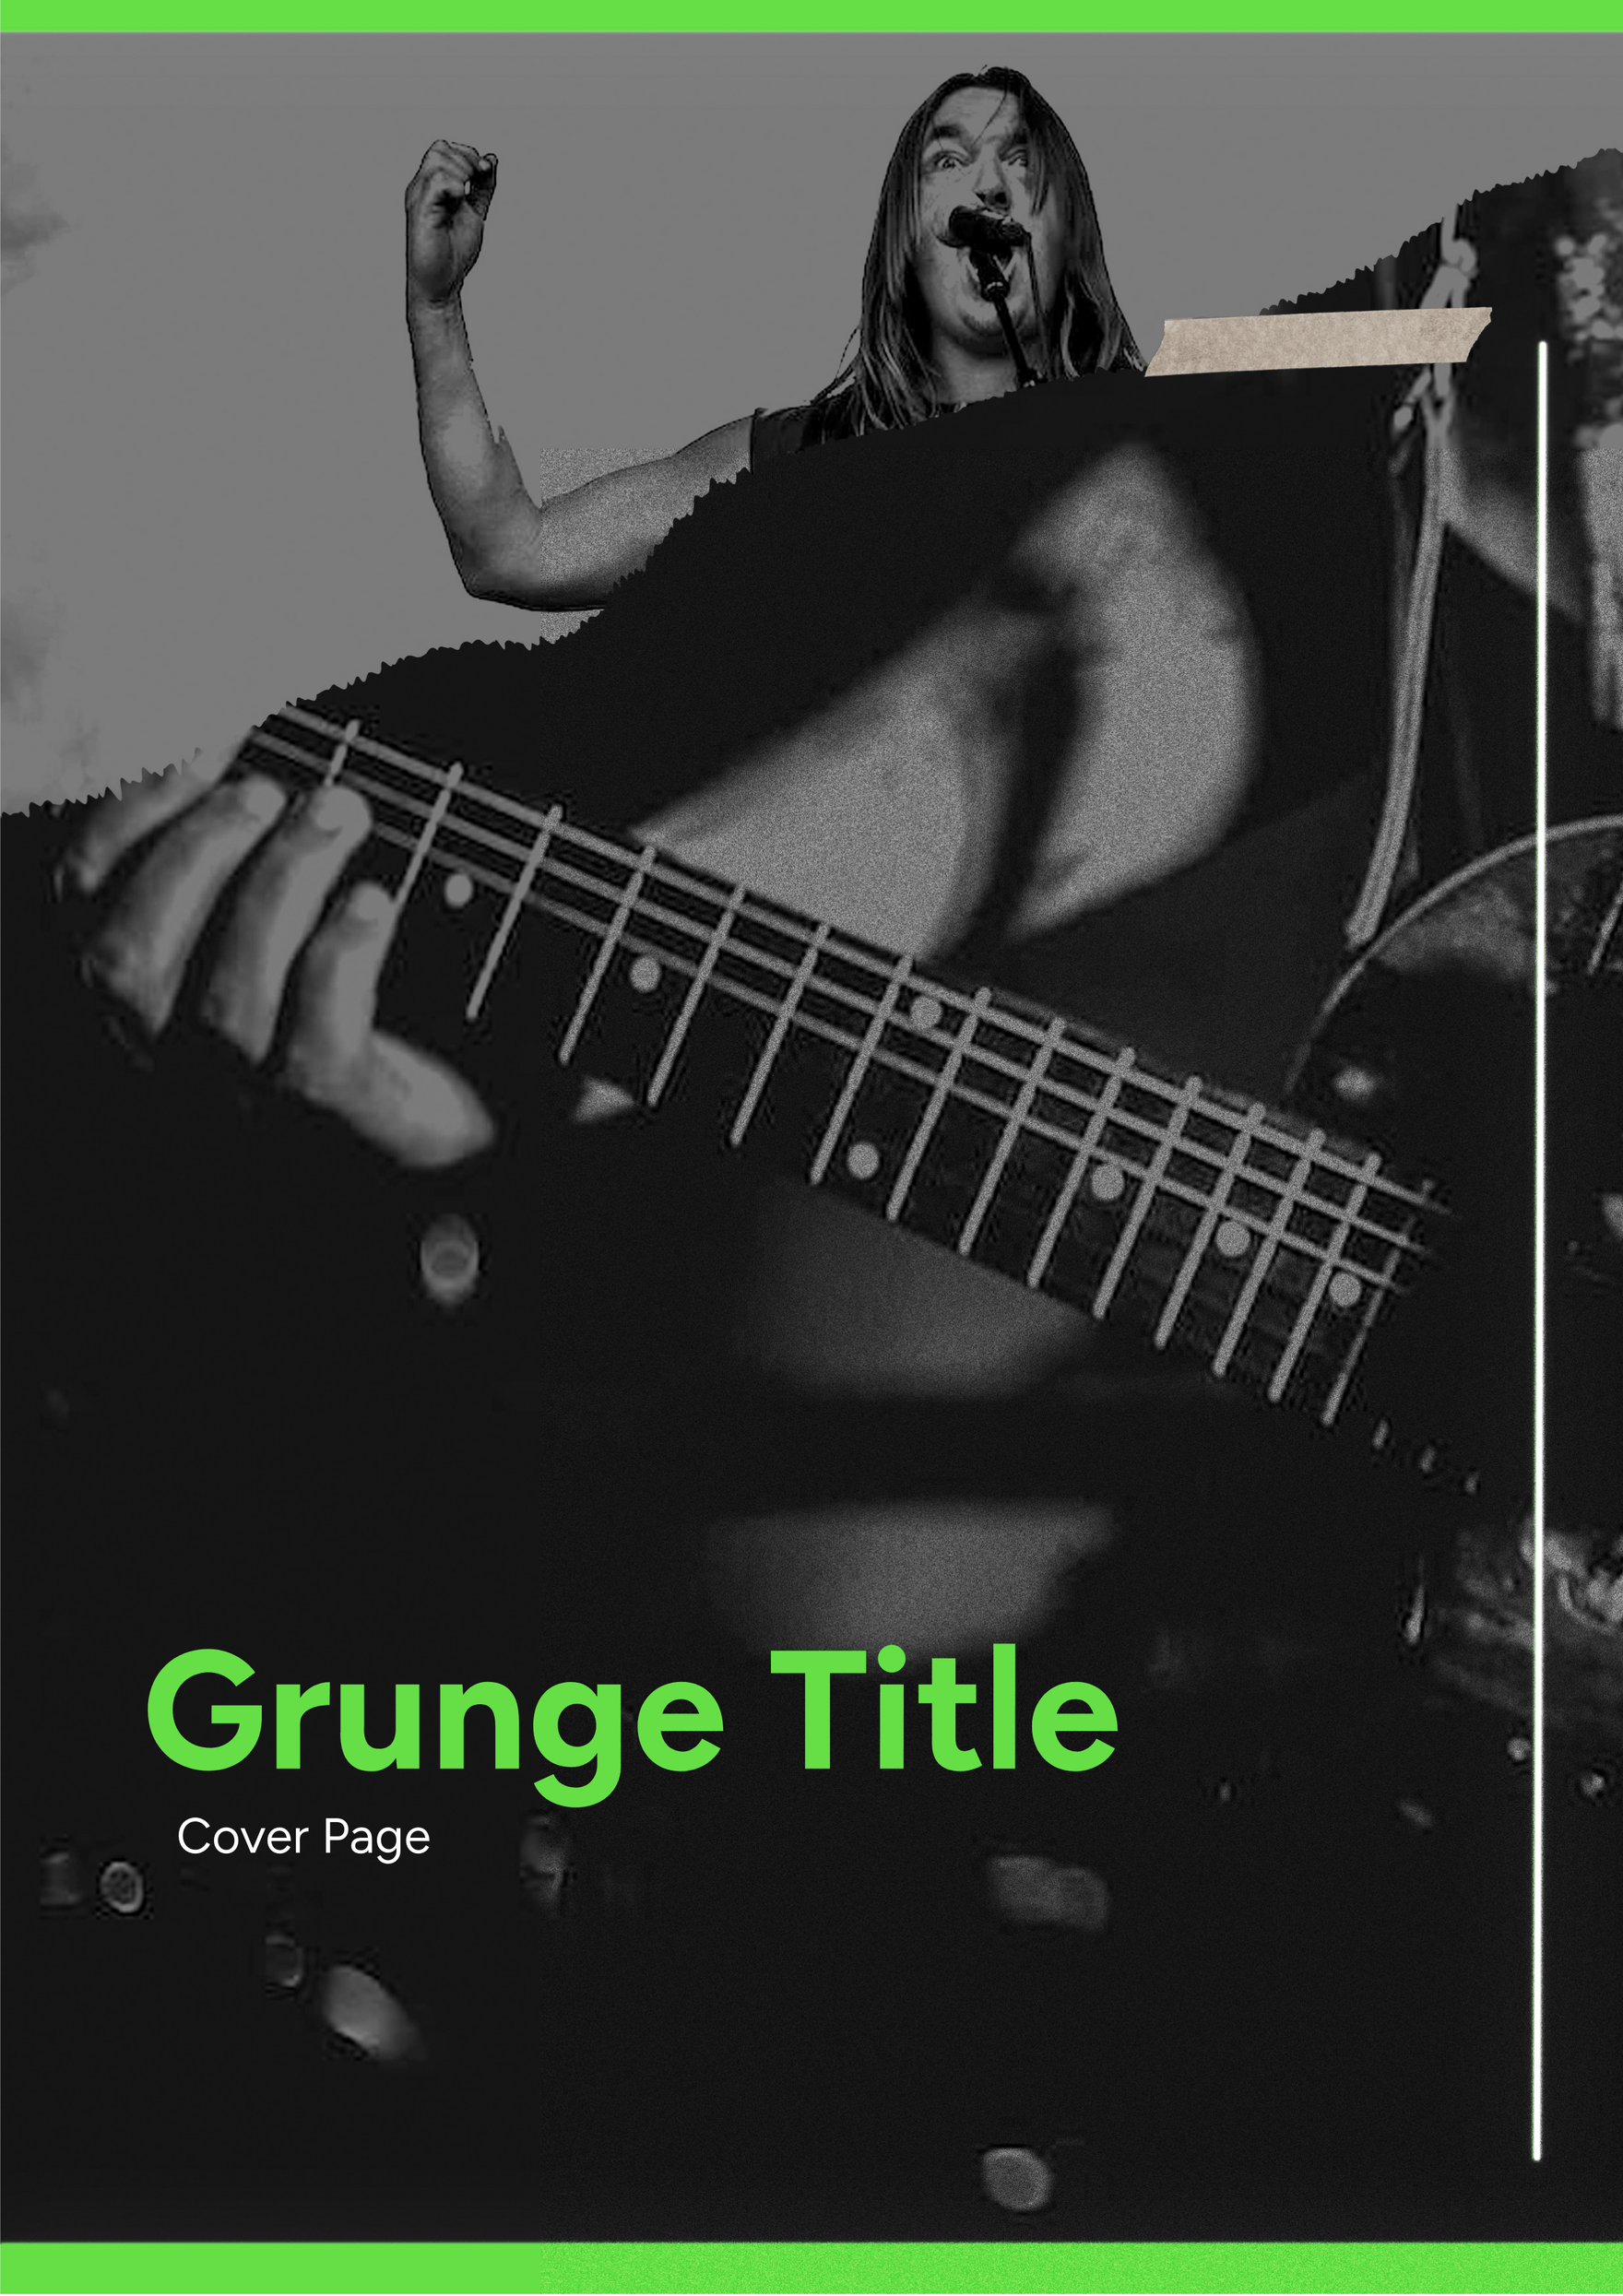 Grunge Title Cover Page Template